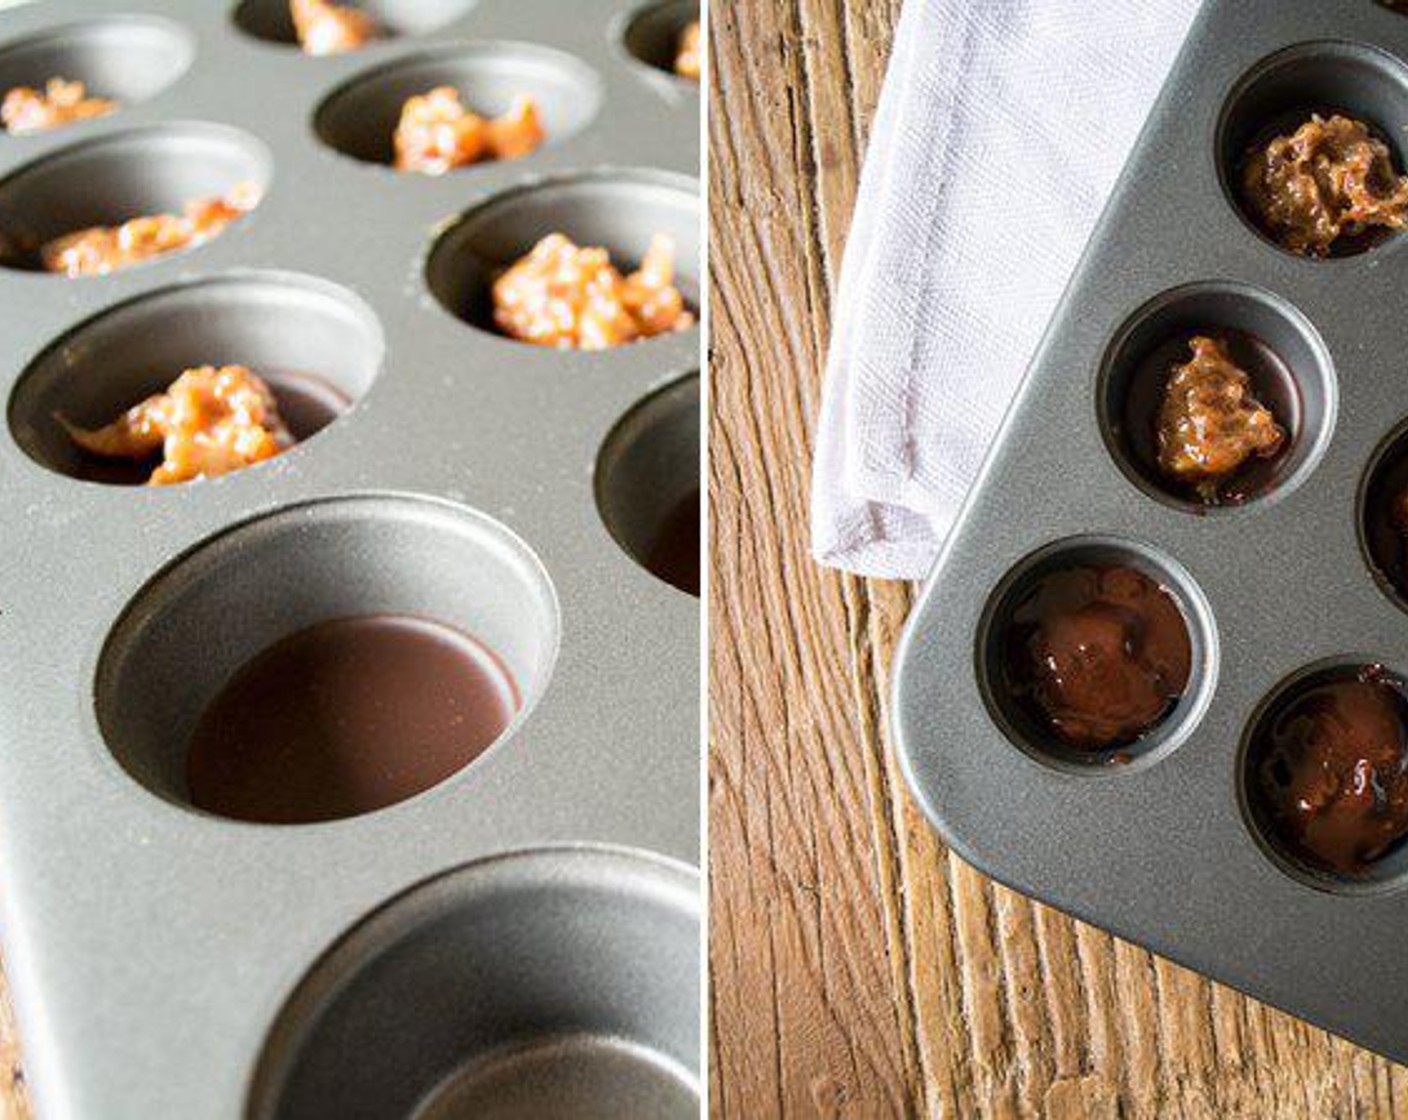 step 3 In mini muffin pan, spoon in small spoonful of melted chocolate mixture (set some aside to add after the caramel). Tilt the pan slightly to allow chocolate to coat the sides. Place in the freezer to set for approximately 10 minutes.